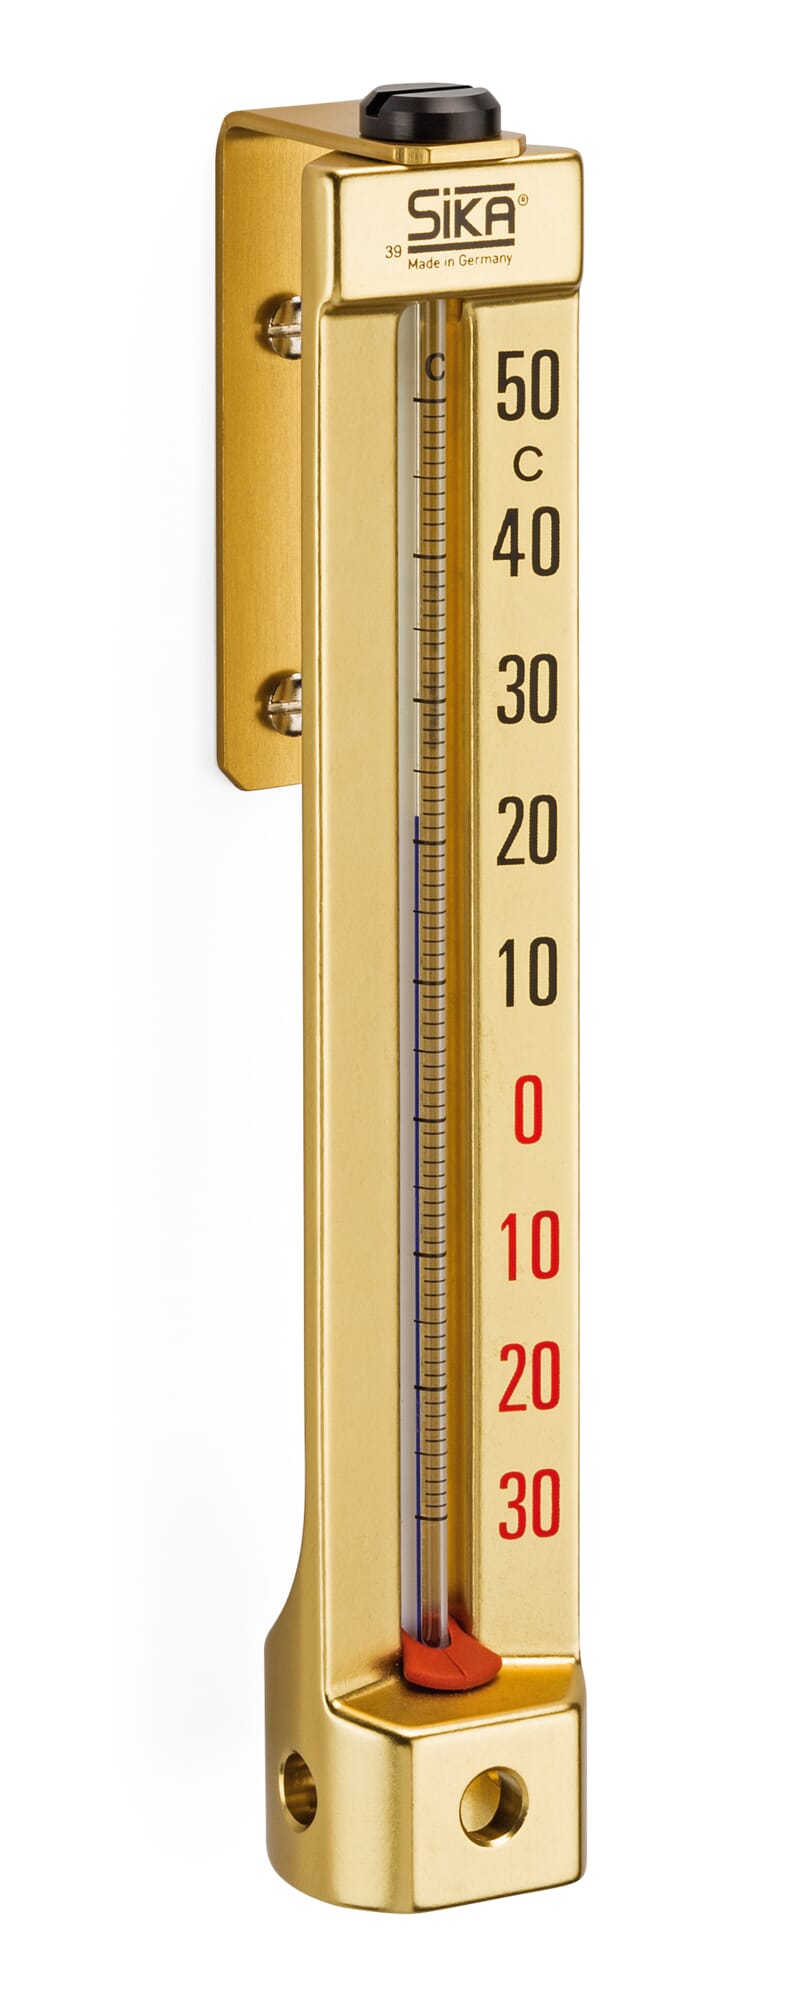 Sika buitenthermometer |